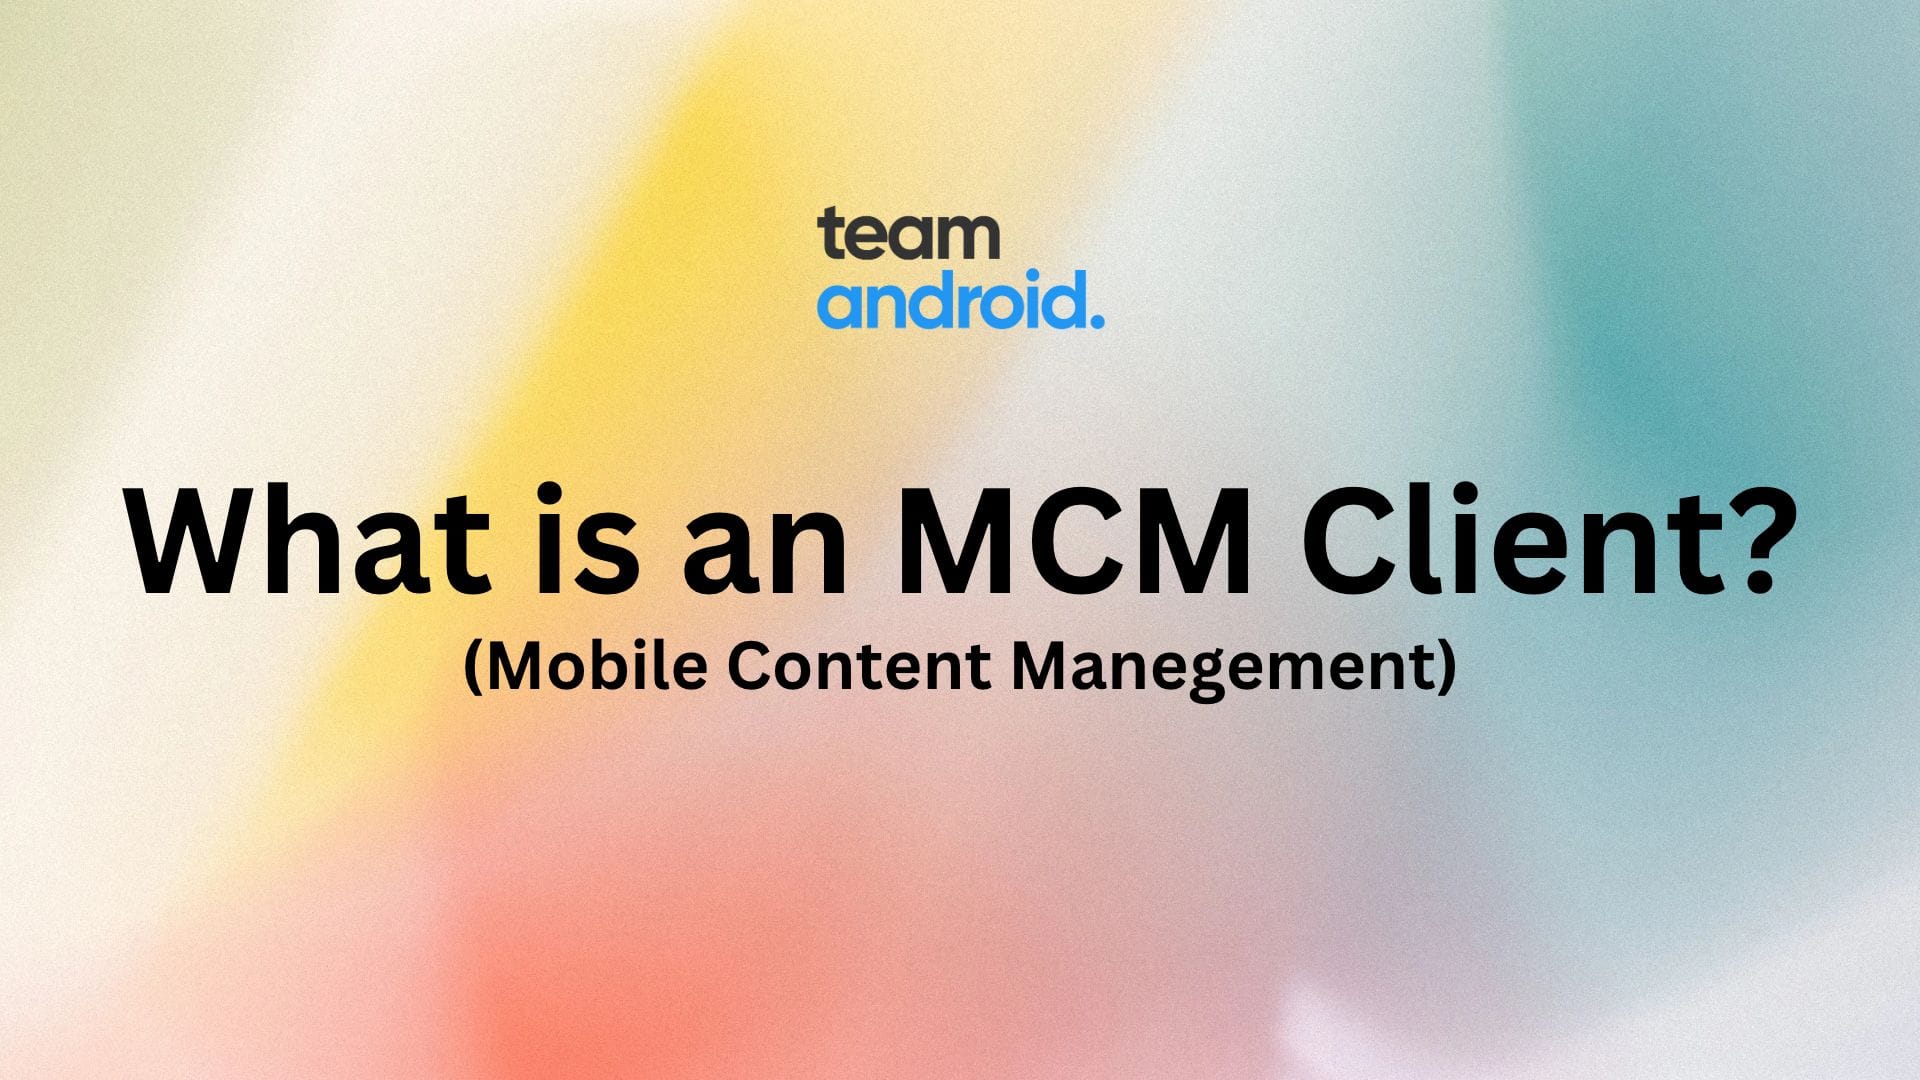 What is MCM Client on Android?